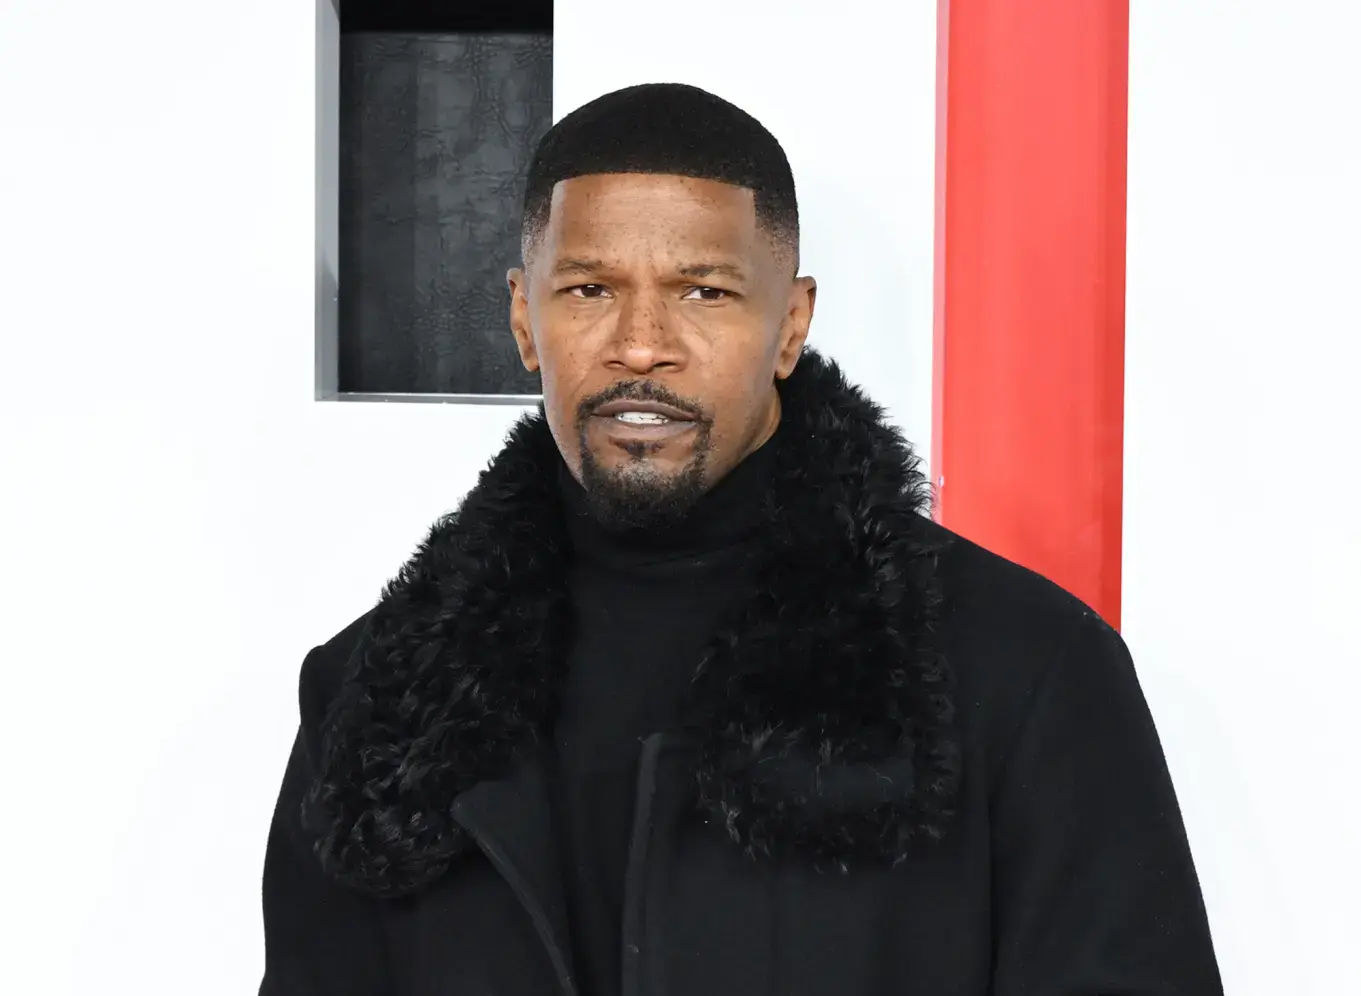 Jamie Foxx sued for alleged sexual assault that took place at NYC restaurant